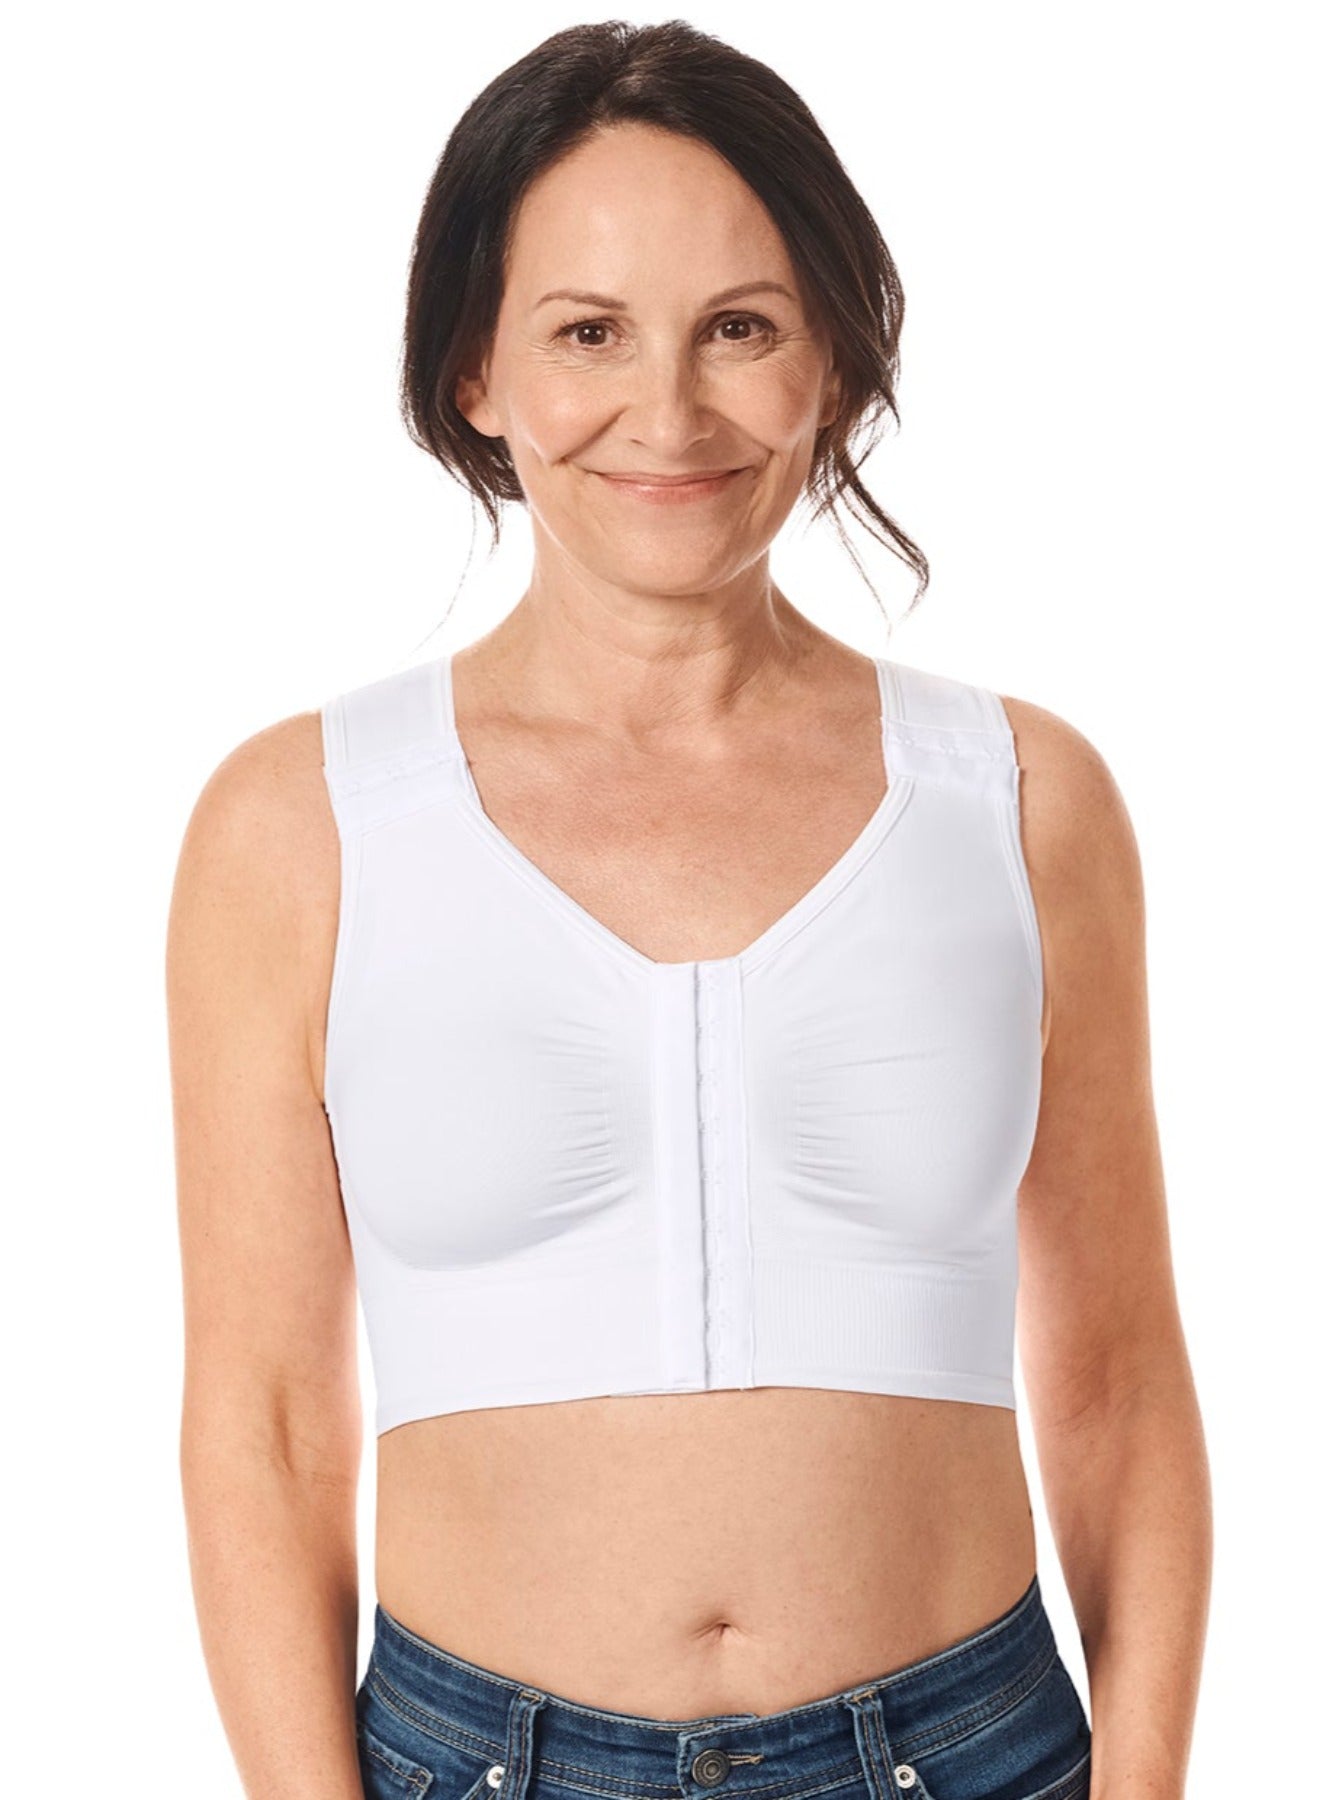 How To Measure and Fit Your Wire Free Mastectomy Bra – Silima